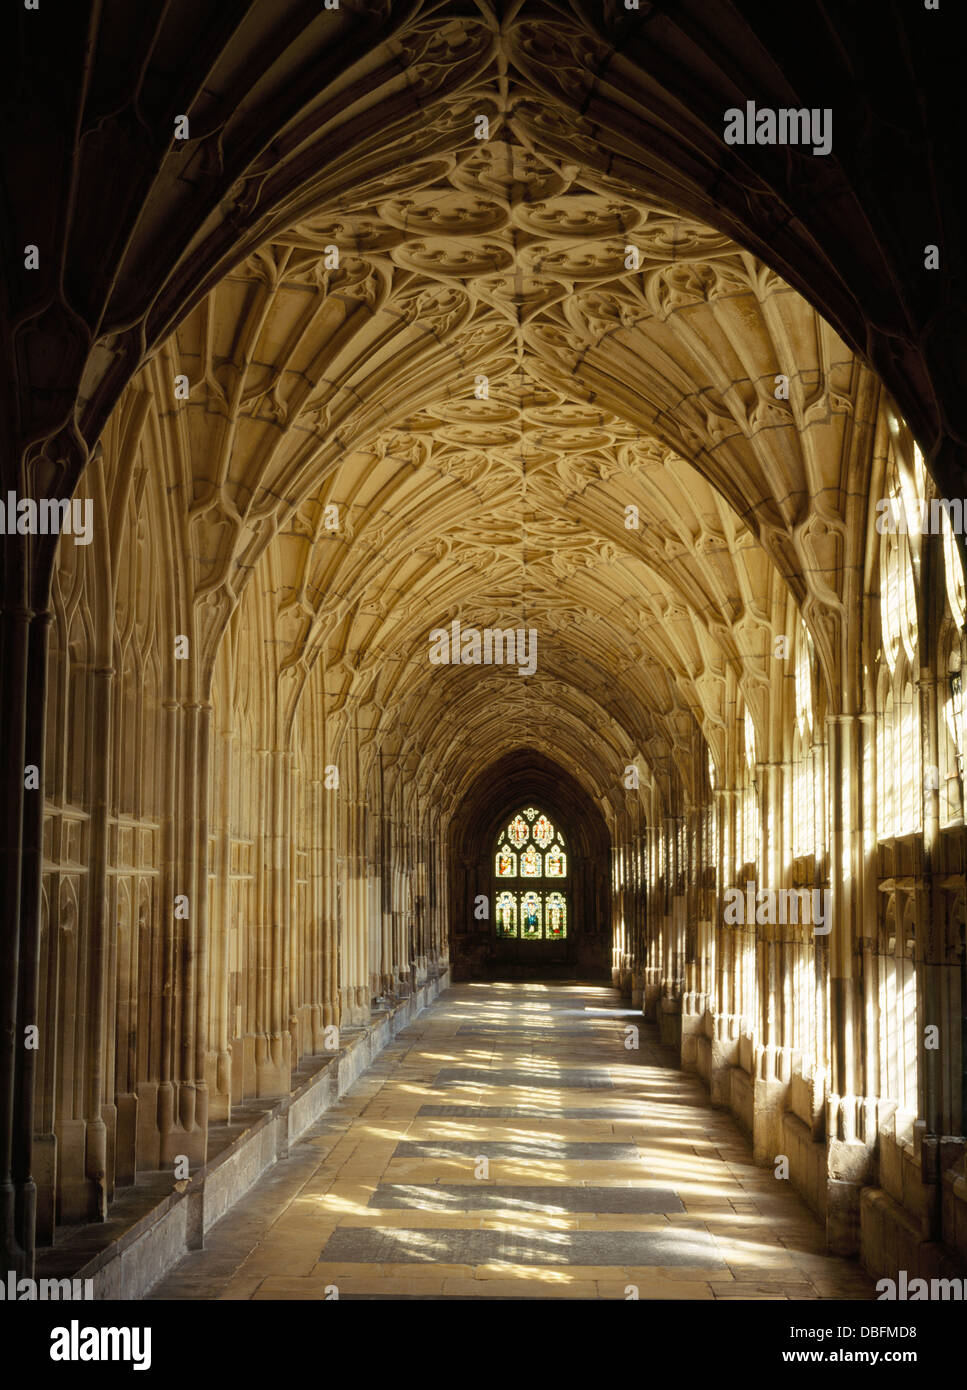 West walk of the Great Cloister (1373-1410) of Gloucester Cathedral, England, former Benedictine abbey of St Peter. Shows early use of fan vaulting. Stock Photo